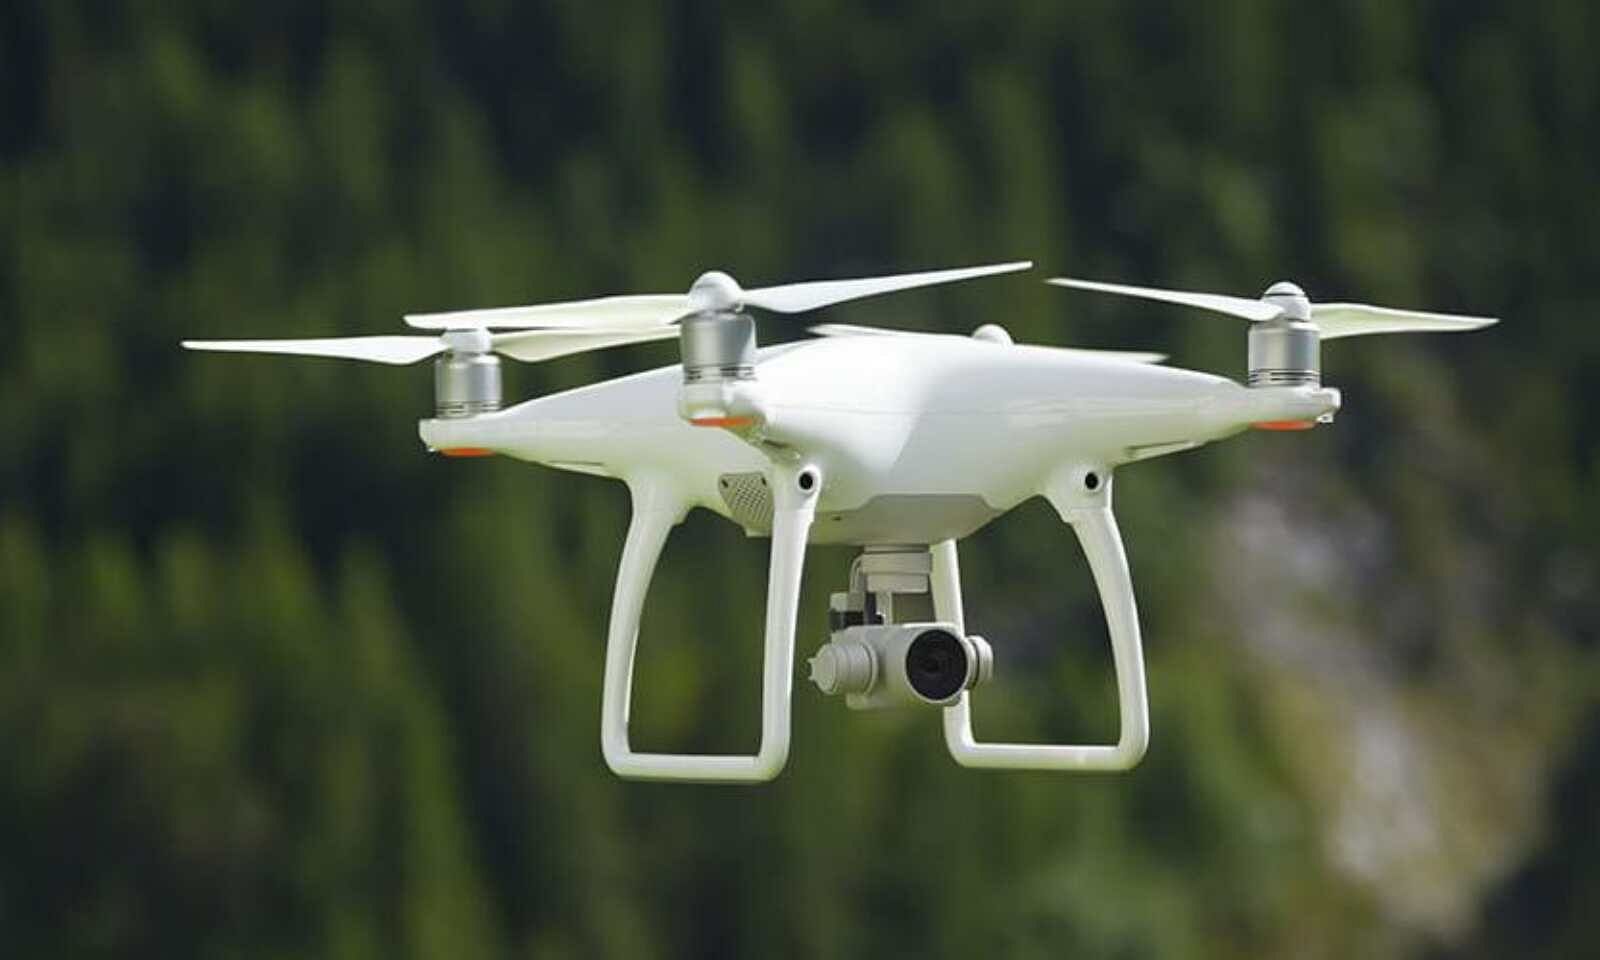 Assam agri project: Drone survey launched for technical mapping of Gorukhuti area